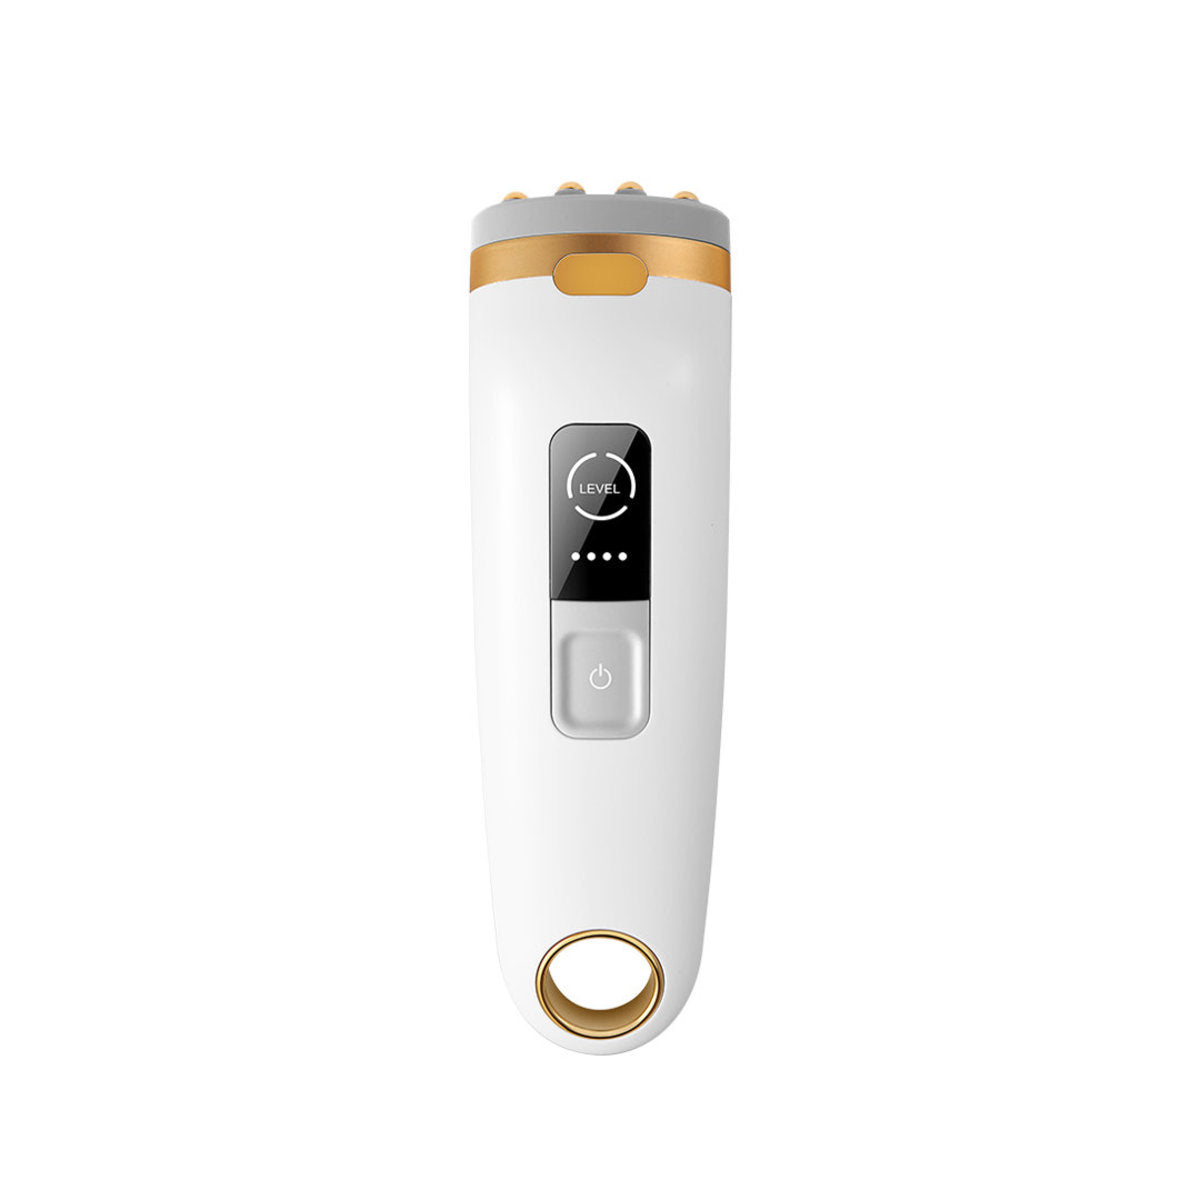 CosBeauty - PerfectGlow RF radiofrequency tightening device [Hong Kong licensed product]